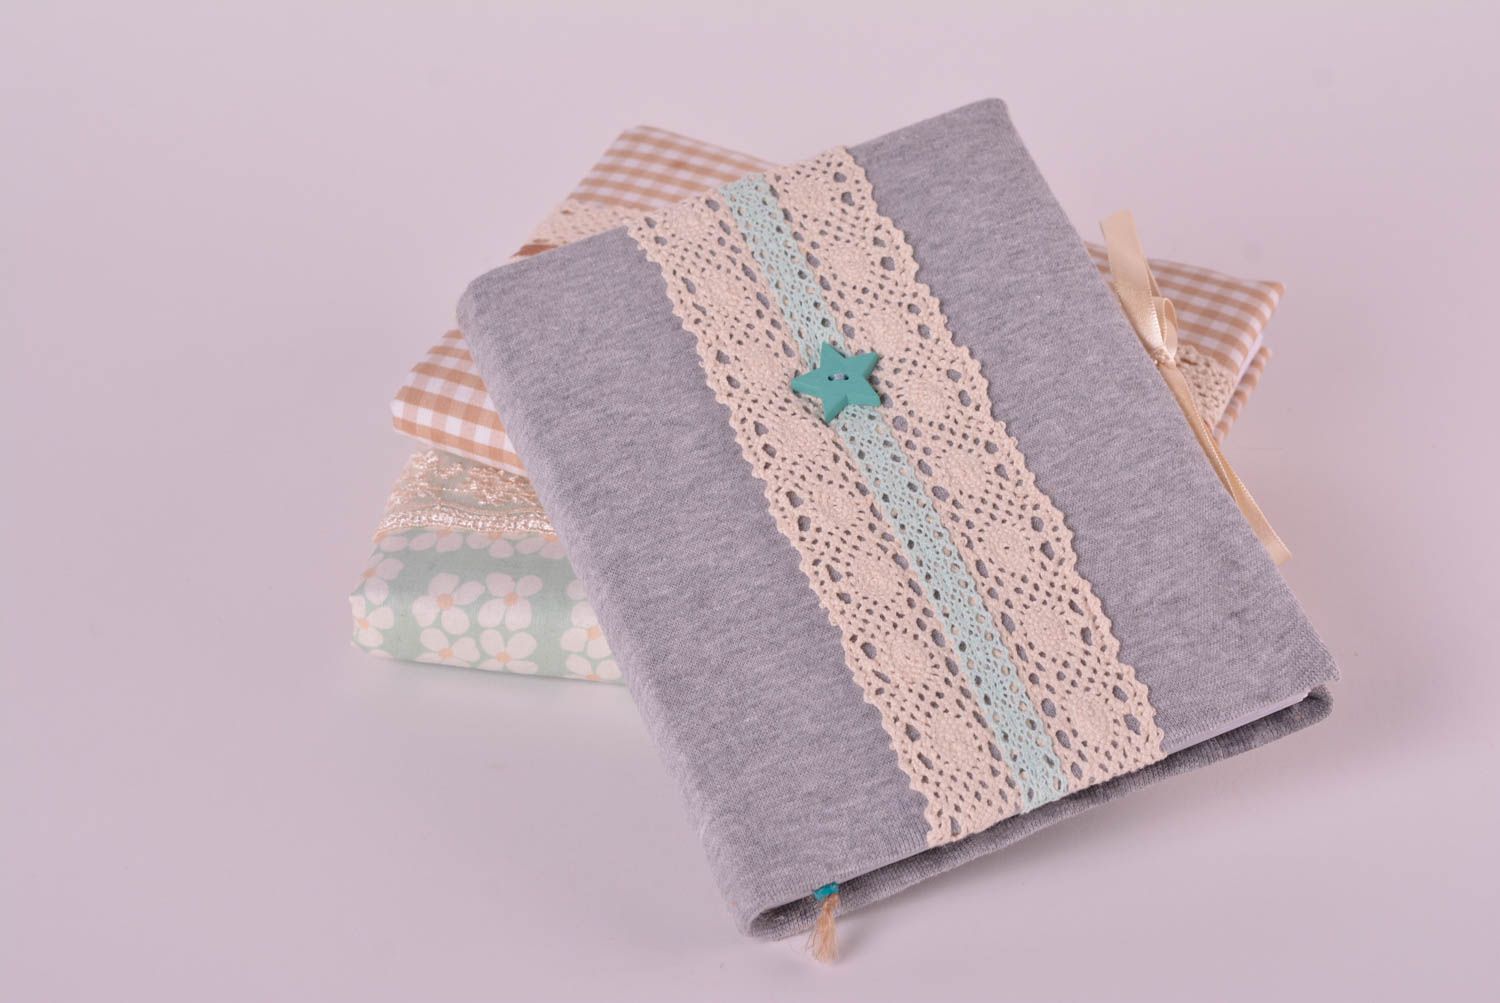 Handmade notebook handmade sketchbook gray notepad with lace cover cute notebook photo 1